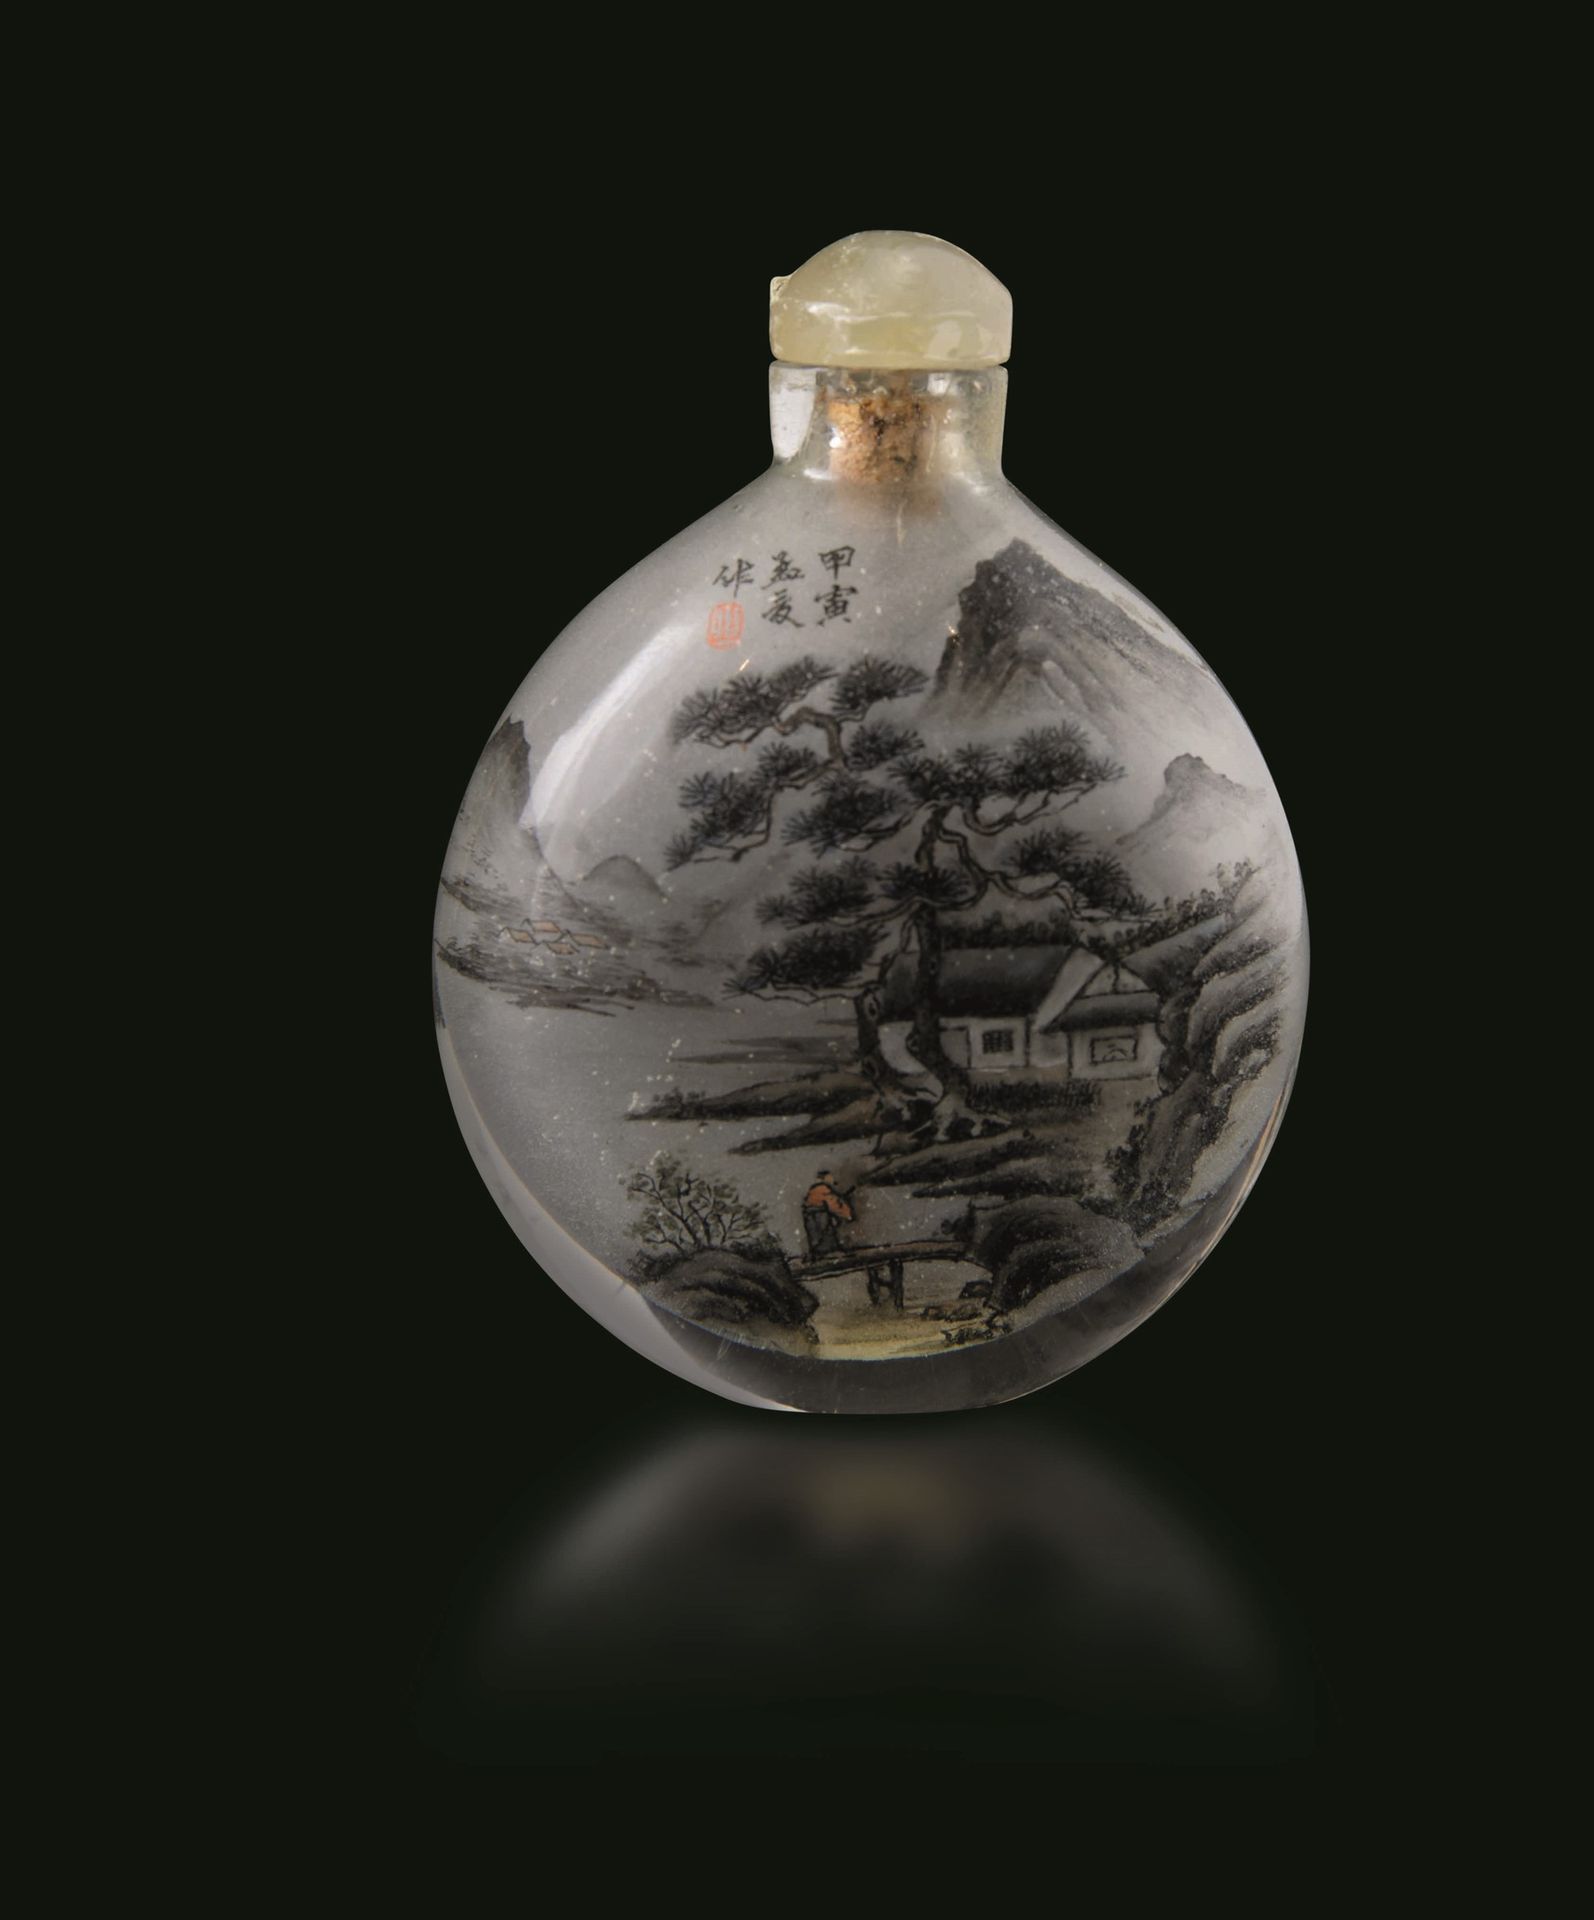 A glass snuff bottle, China, Qing Dynasty, 1800s 高7厘米